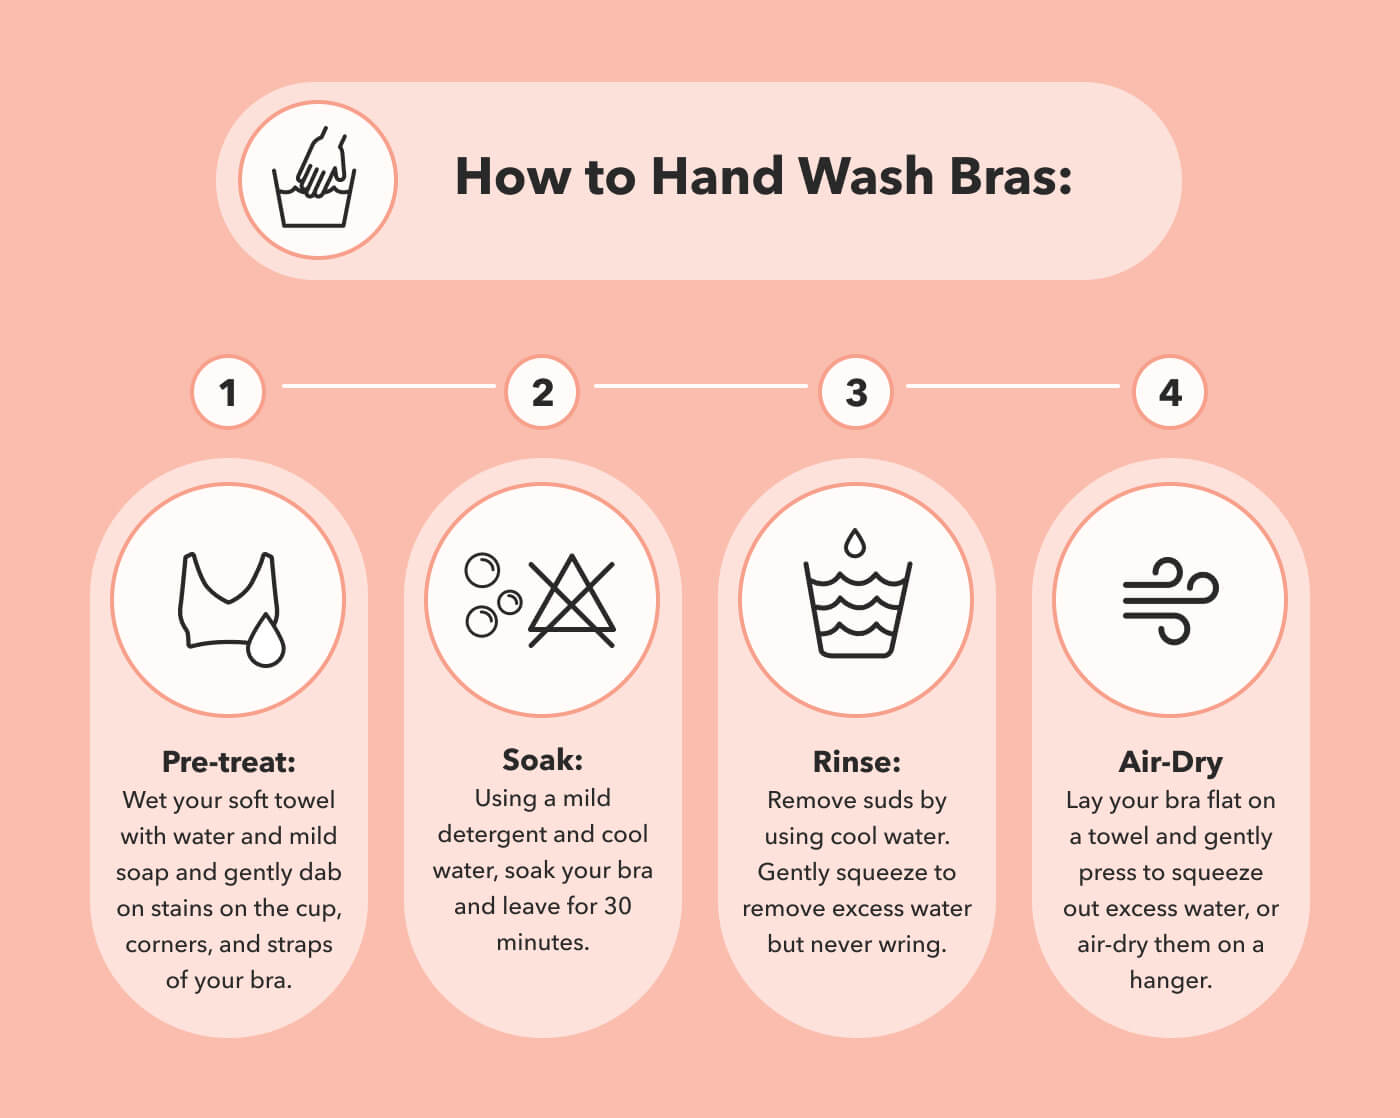 How to Hand Wash Bras